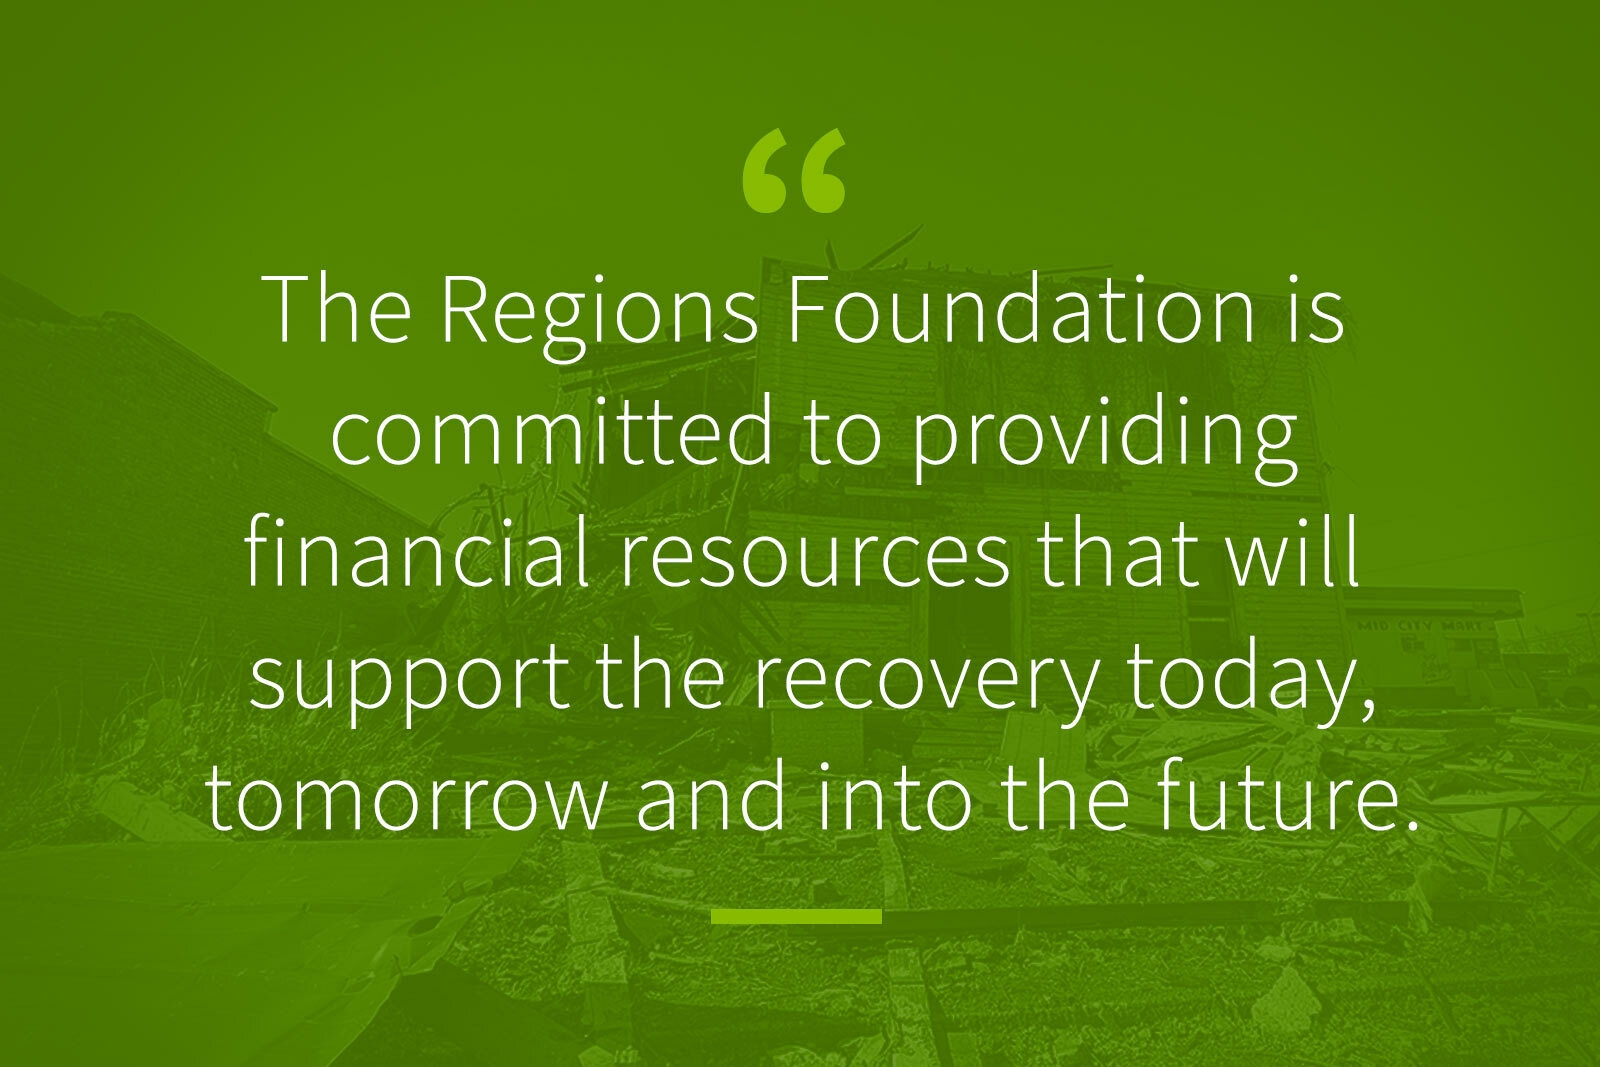 The Regions Foundation is committed to providing financial resources that...